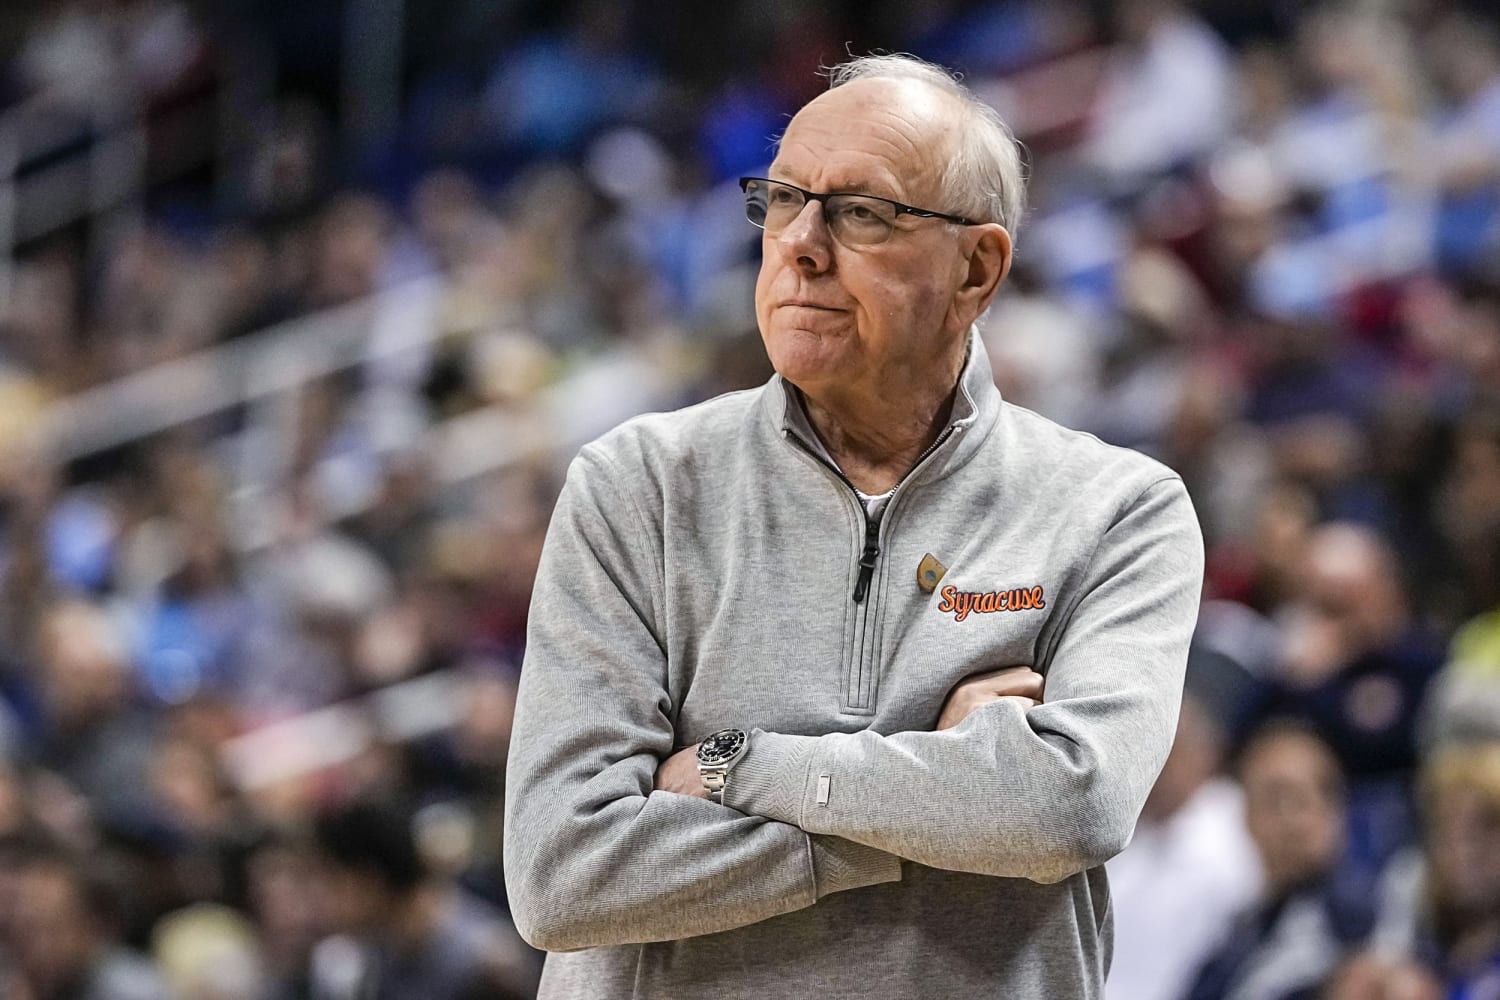 Legendary basketball coach Jim Boeheim’s long career at Syracuse comes to an end